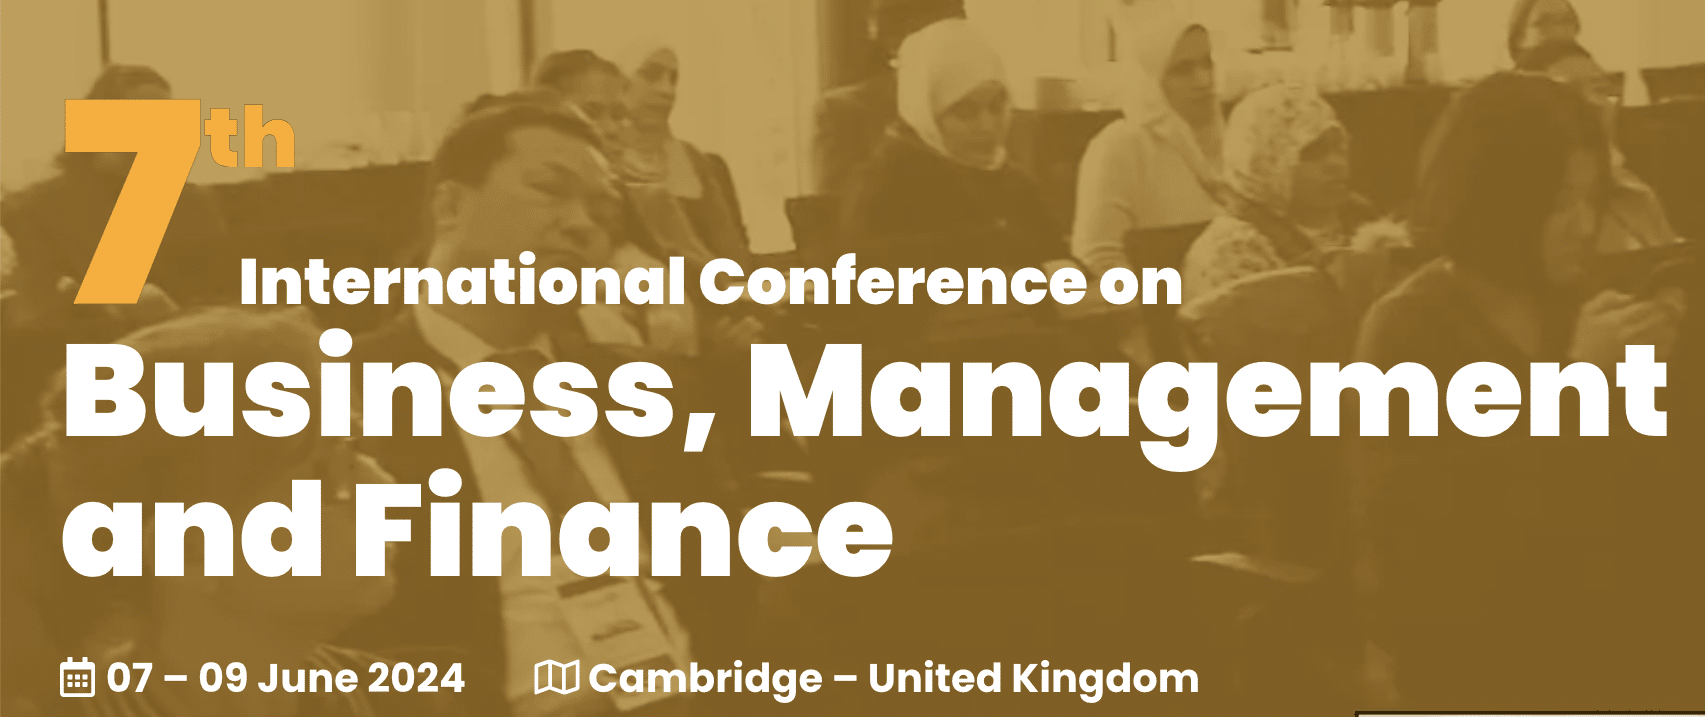 7th International Conference on Business, Management and Finance